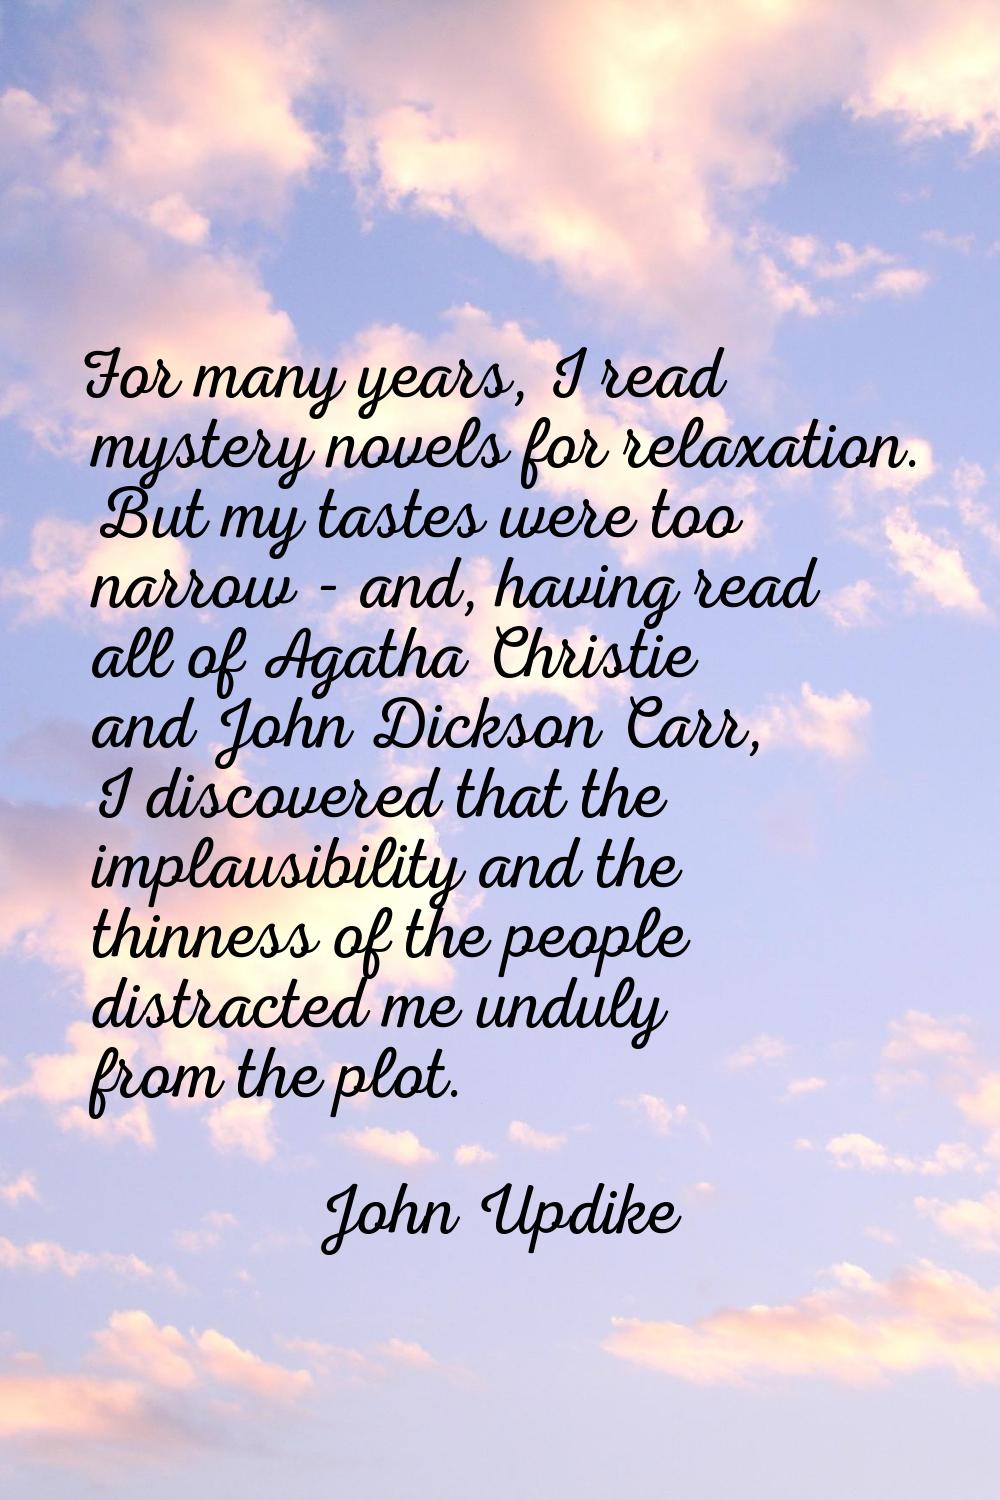 For many years, I read mystery novels for relaxation. But my tastes were too narrow - and, having r